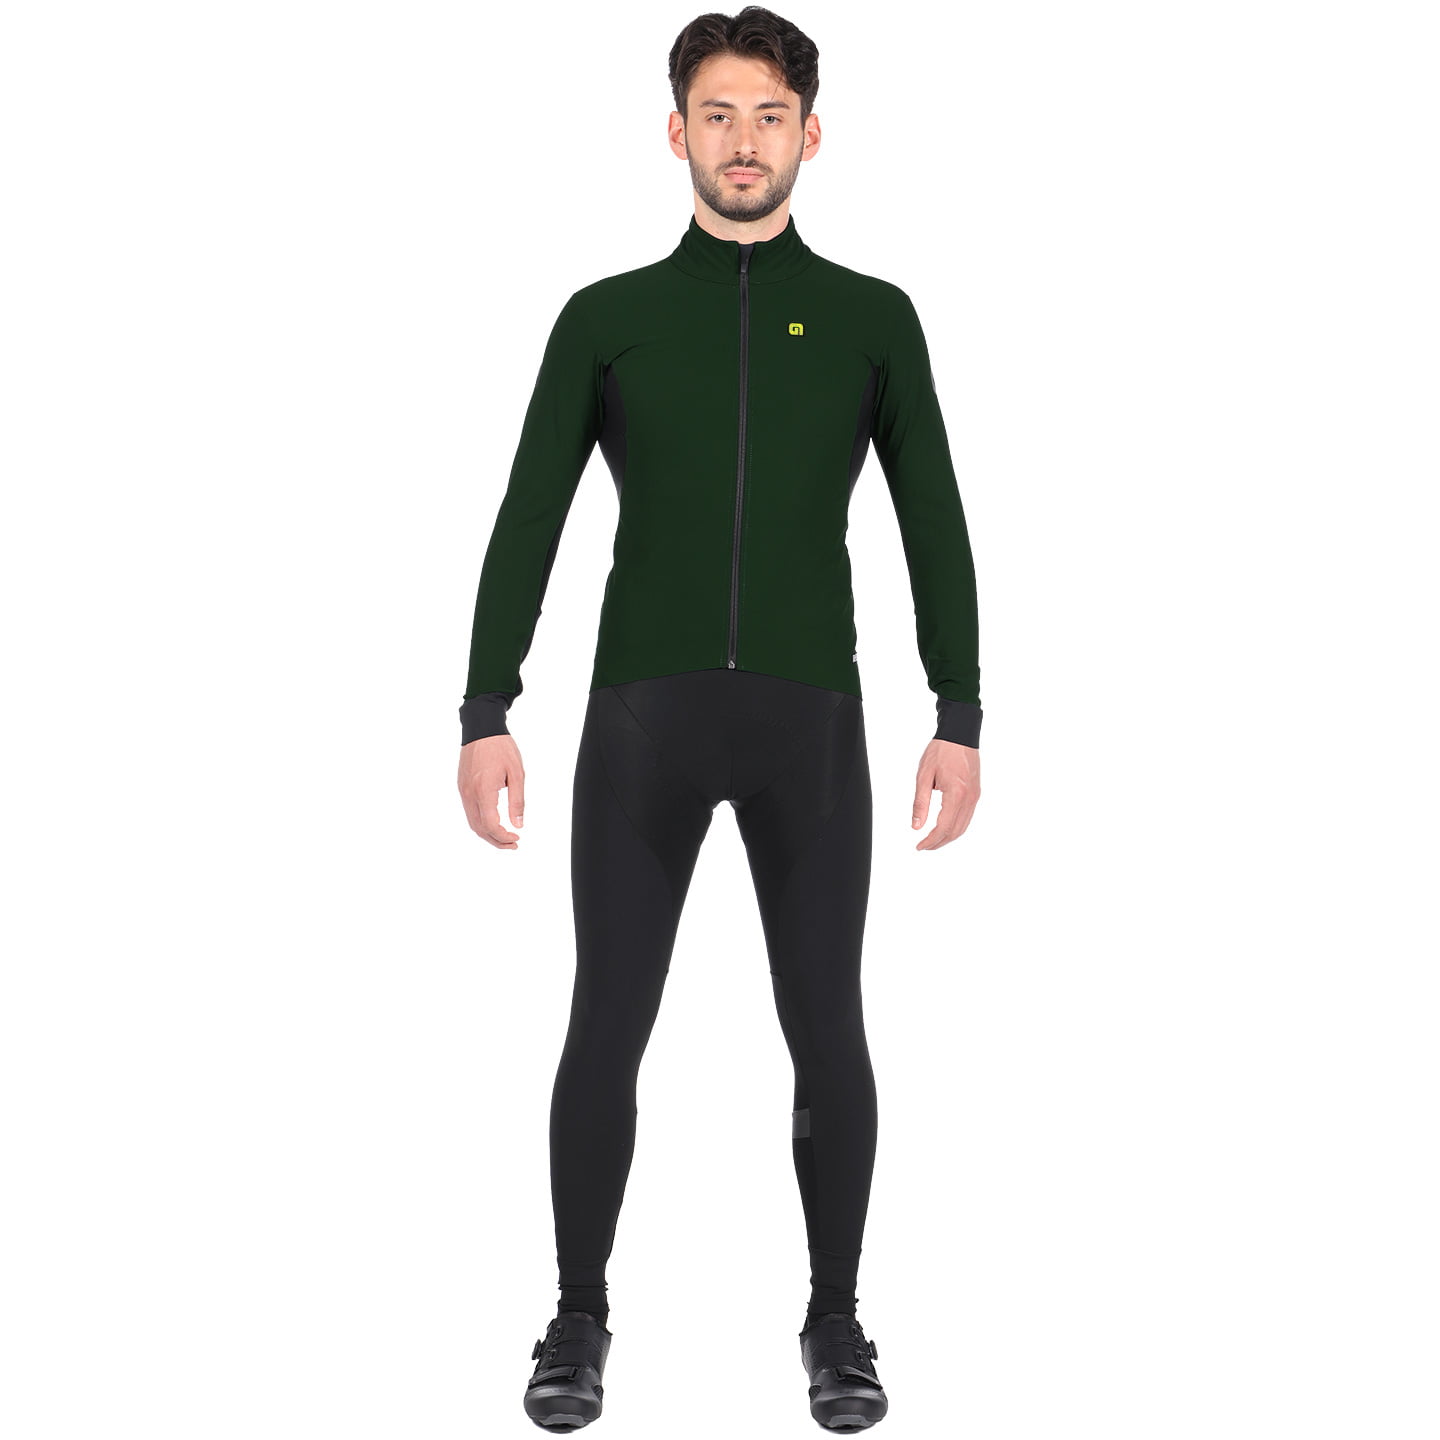 ALE Future Warm Set (winter jacket + cycling tights), for men